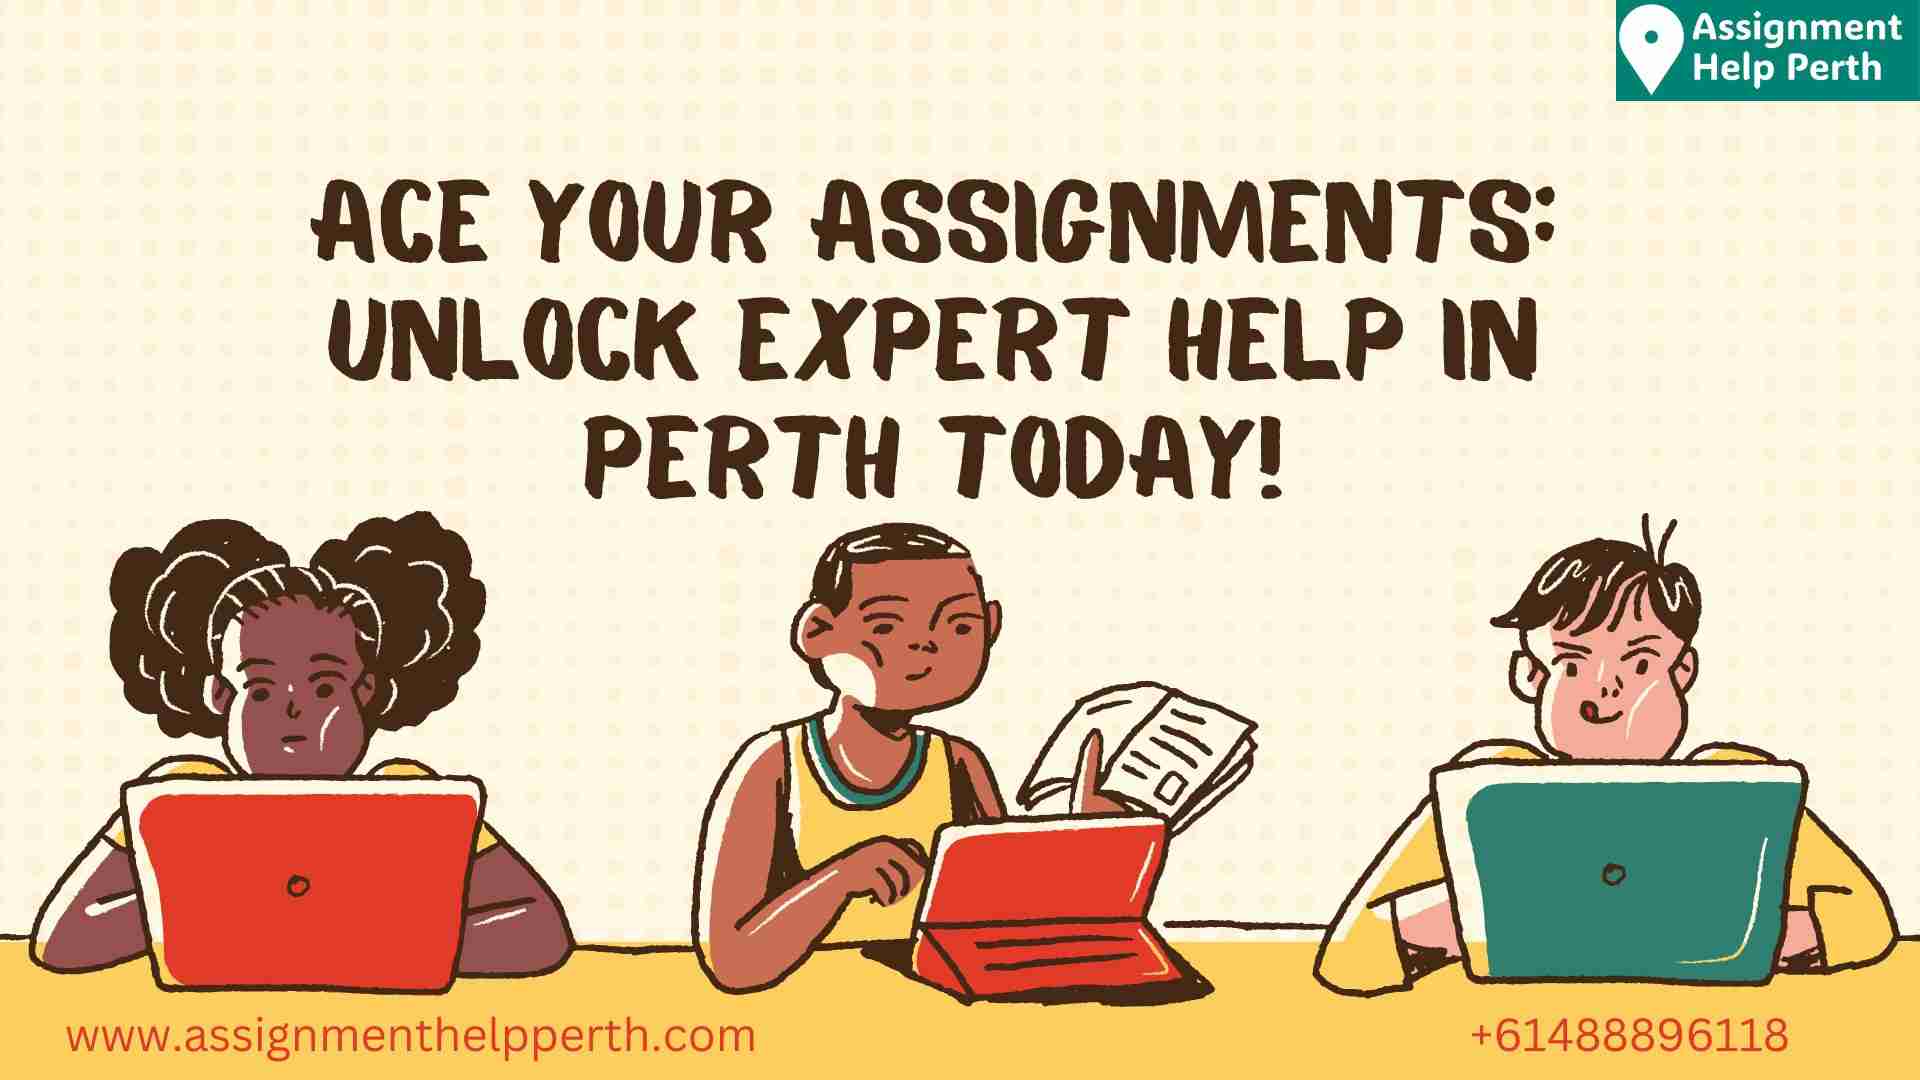 Ace Your Assignments: Unlock Expert Help in Perth Today!